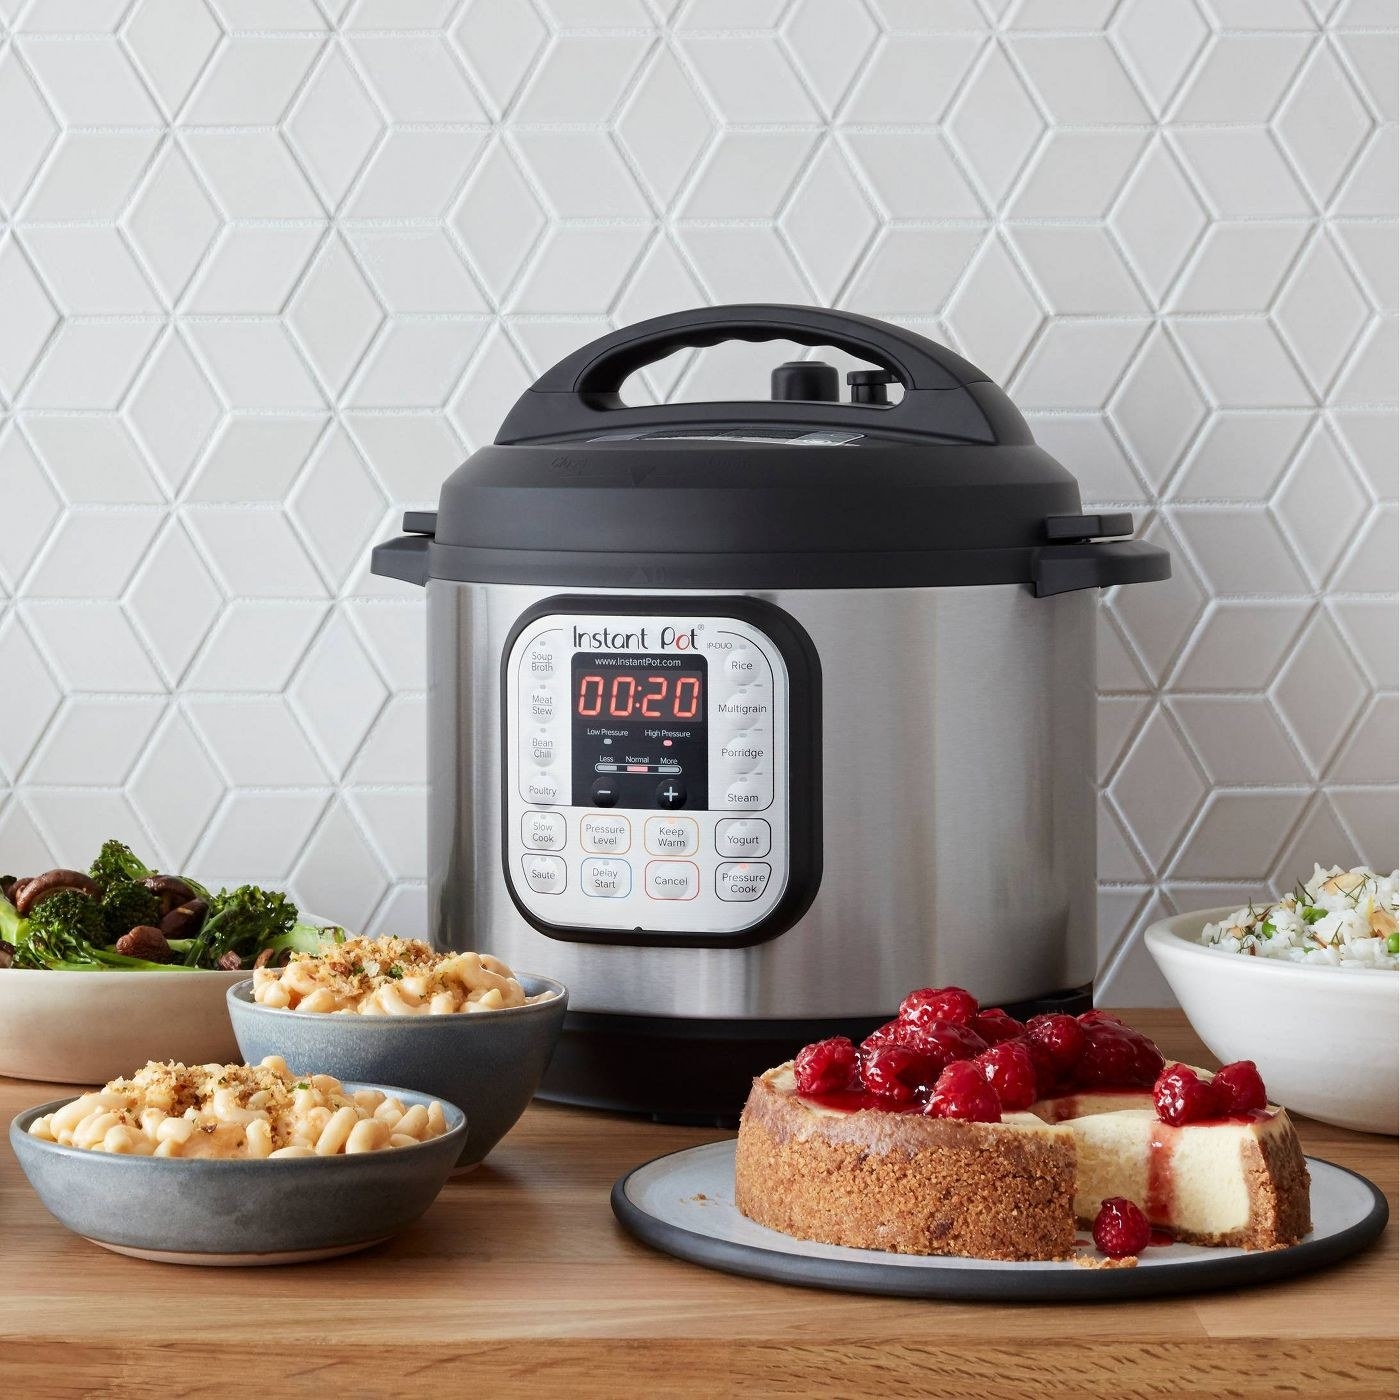 The Instant pot beside several dishes it can prepare